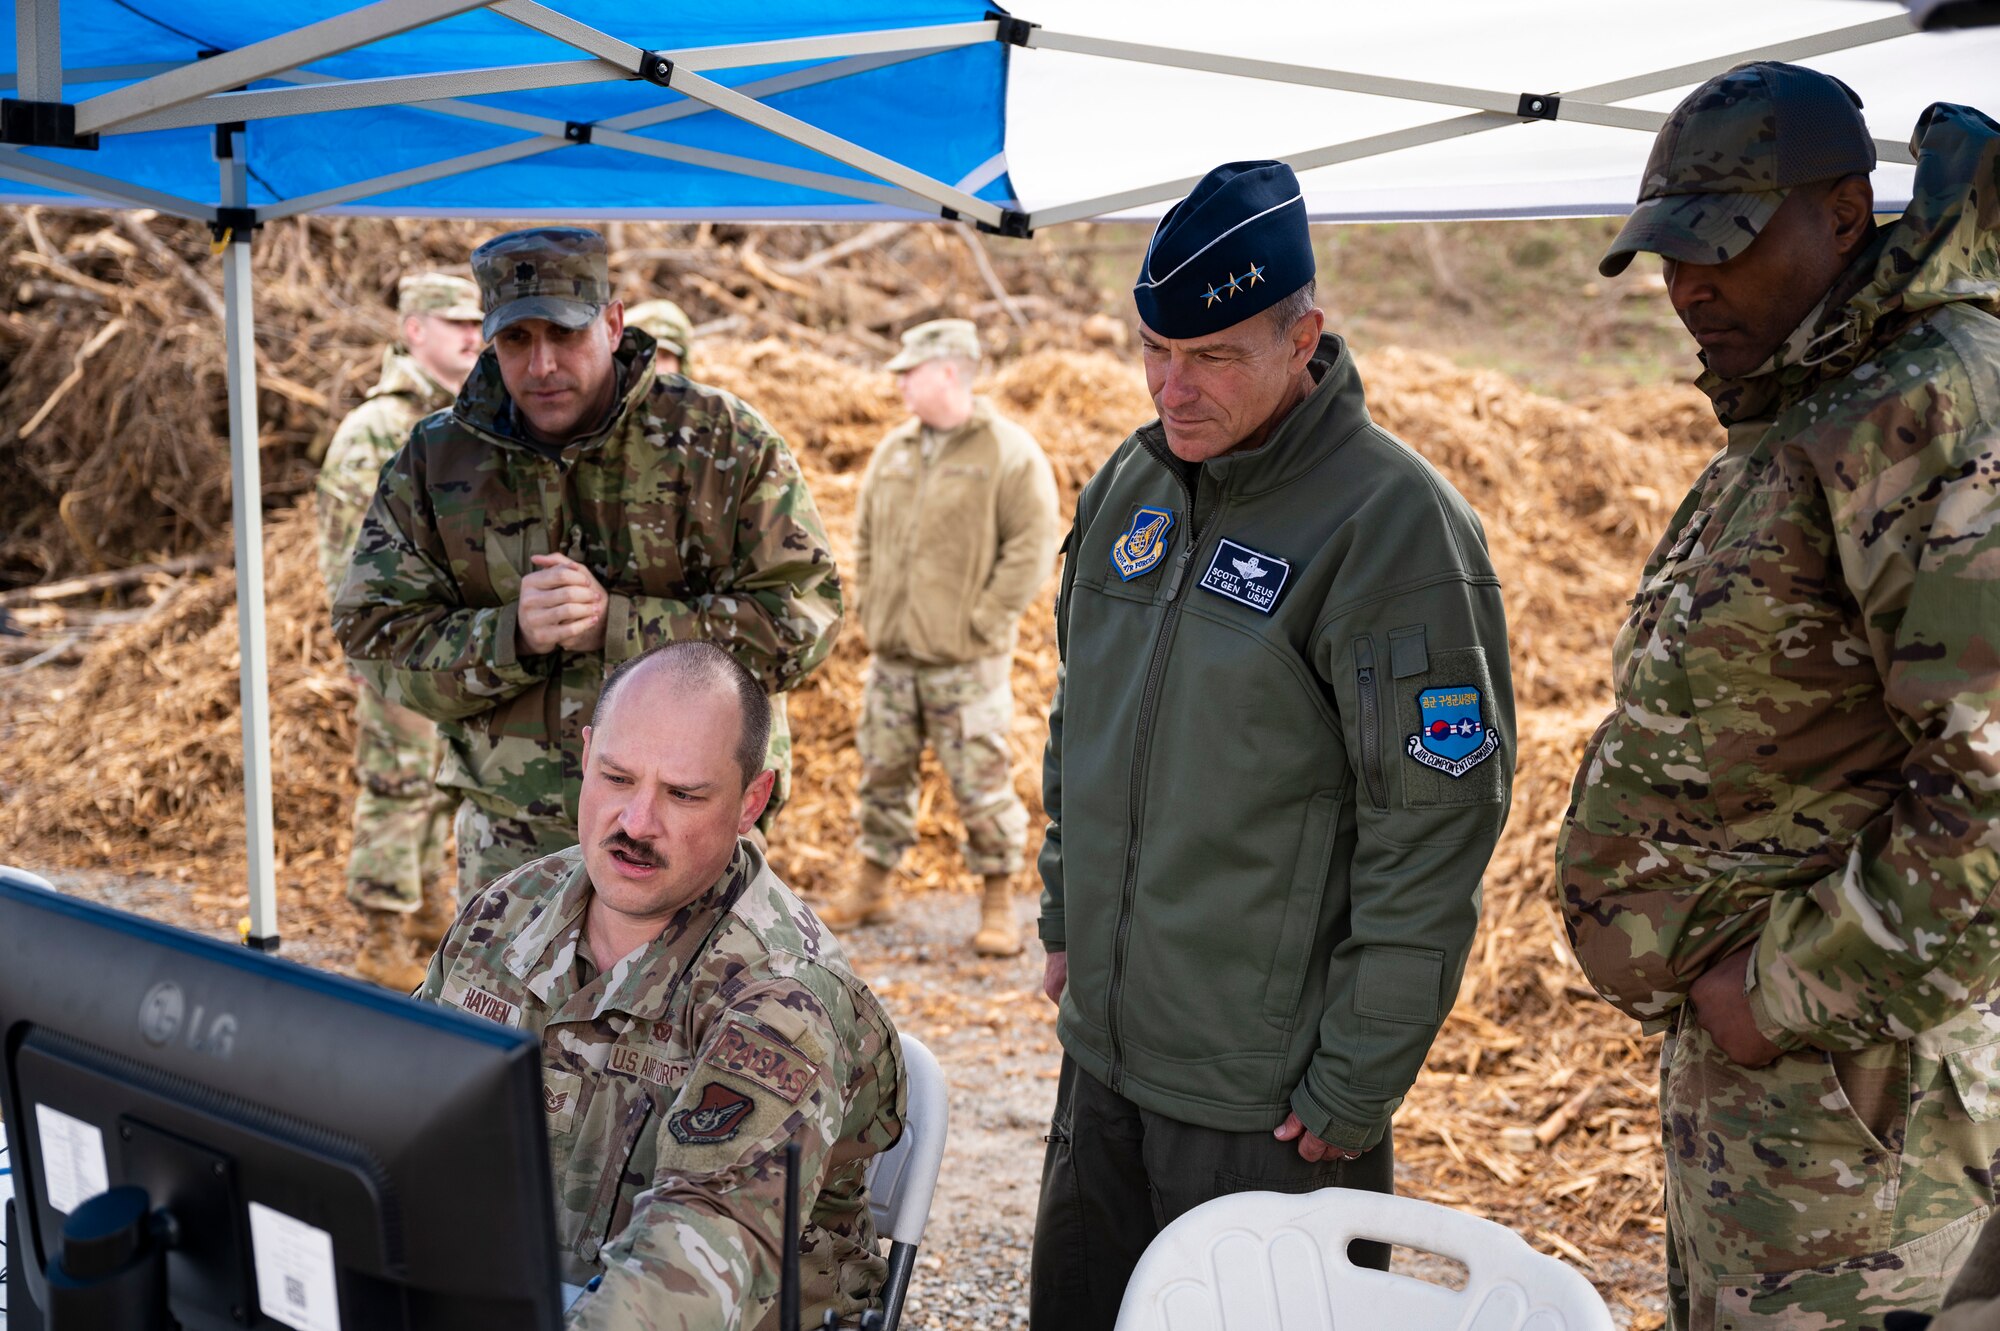 Tech. Sgt. William Hayden, 8th Civil Engineer Squadron construction manager, demonstrates the Rapid Airfield Damage Assessment System capabilities to Lt. Gen. Scott Pleus, Seventh Air Force commander, and Chief Master Sgt. Alvin Dyer, Seventh Air Force command chief, at Kunsan Air Base, Republic of Korea, Nov. 10, 2021.